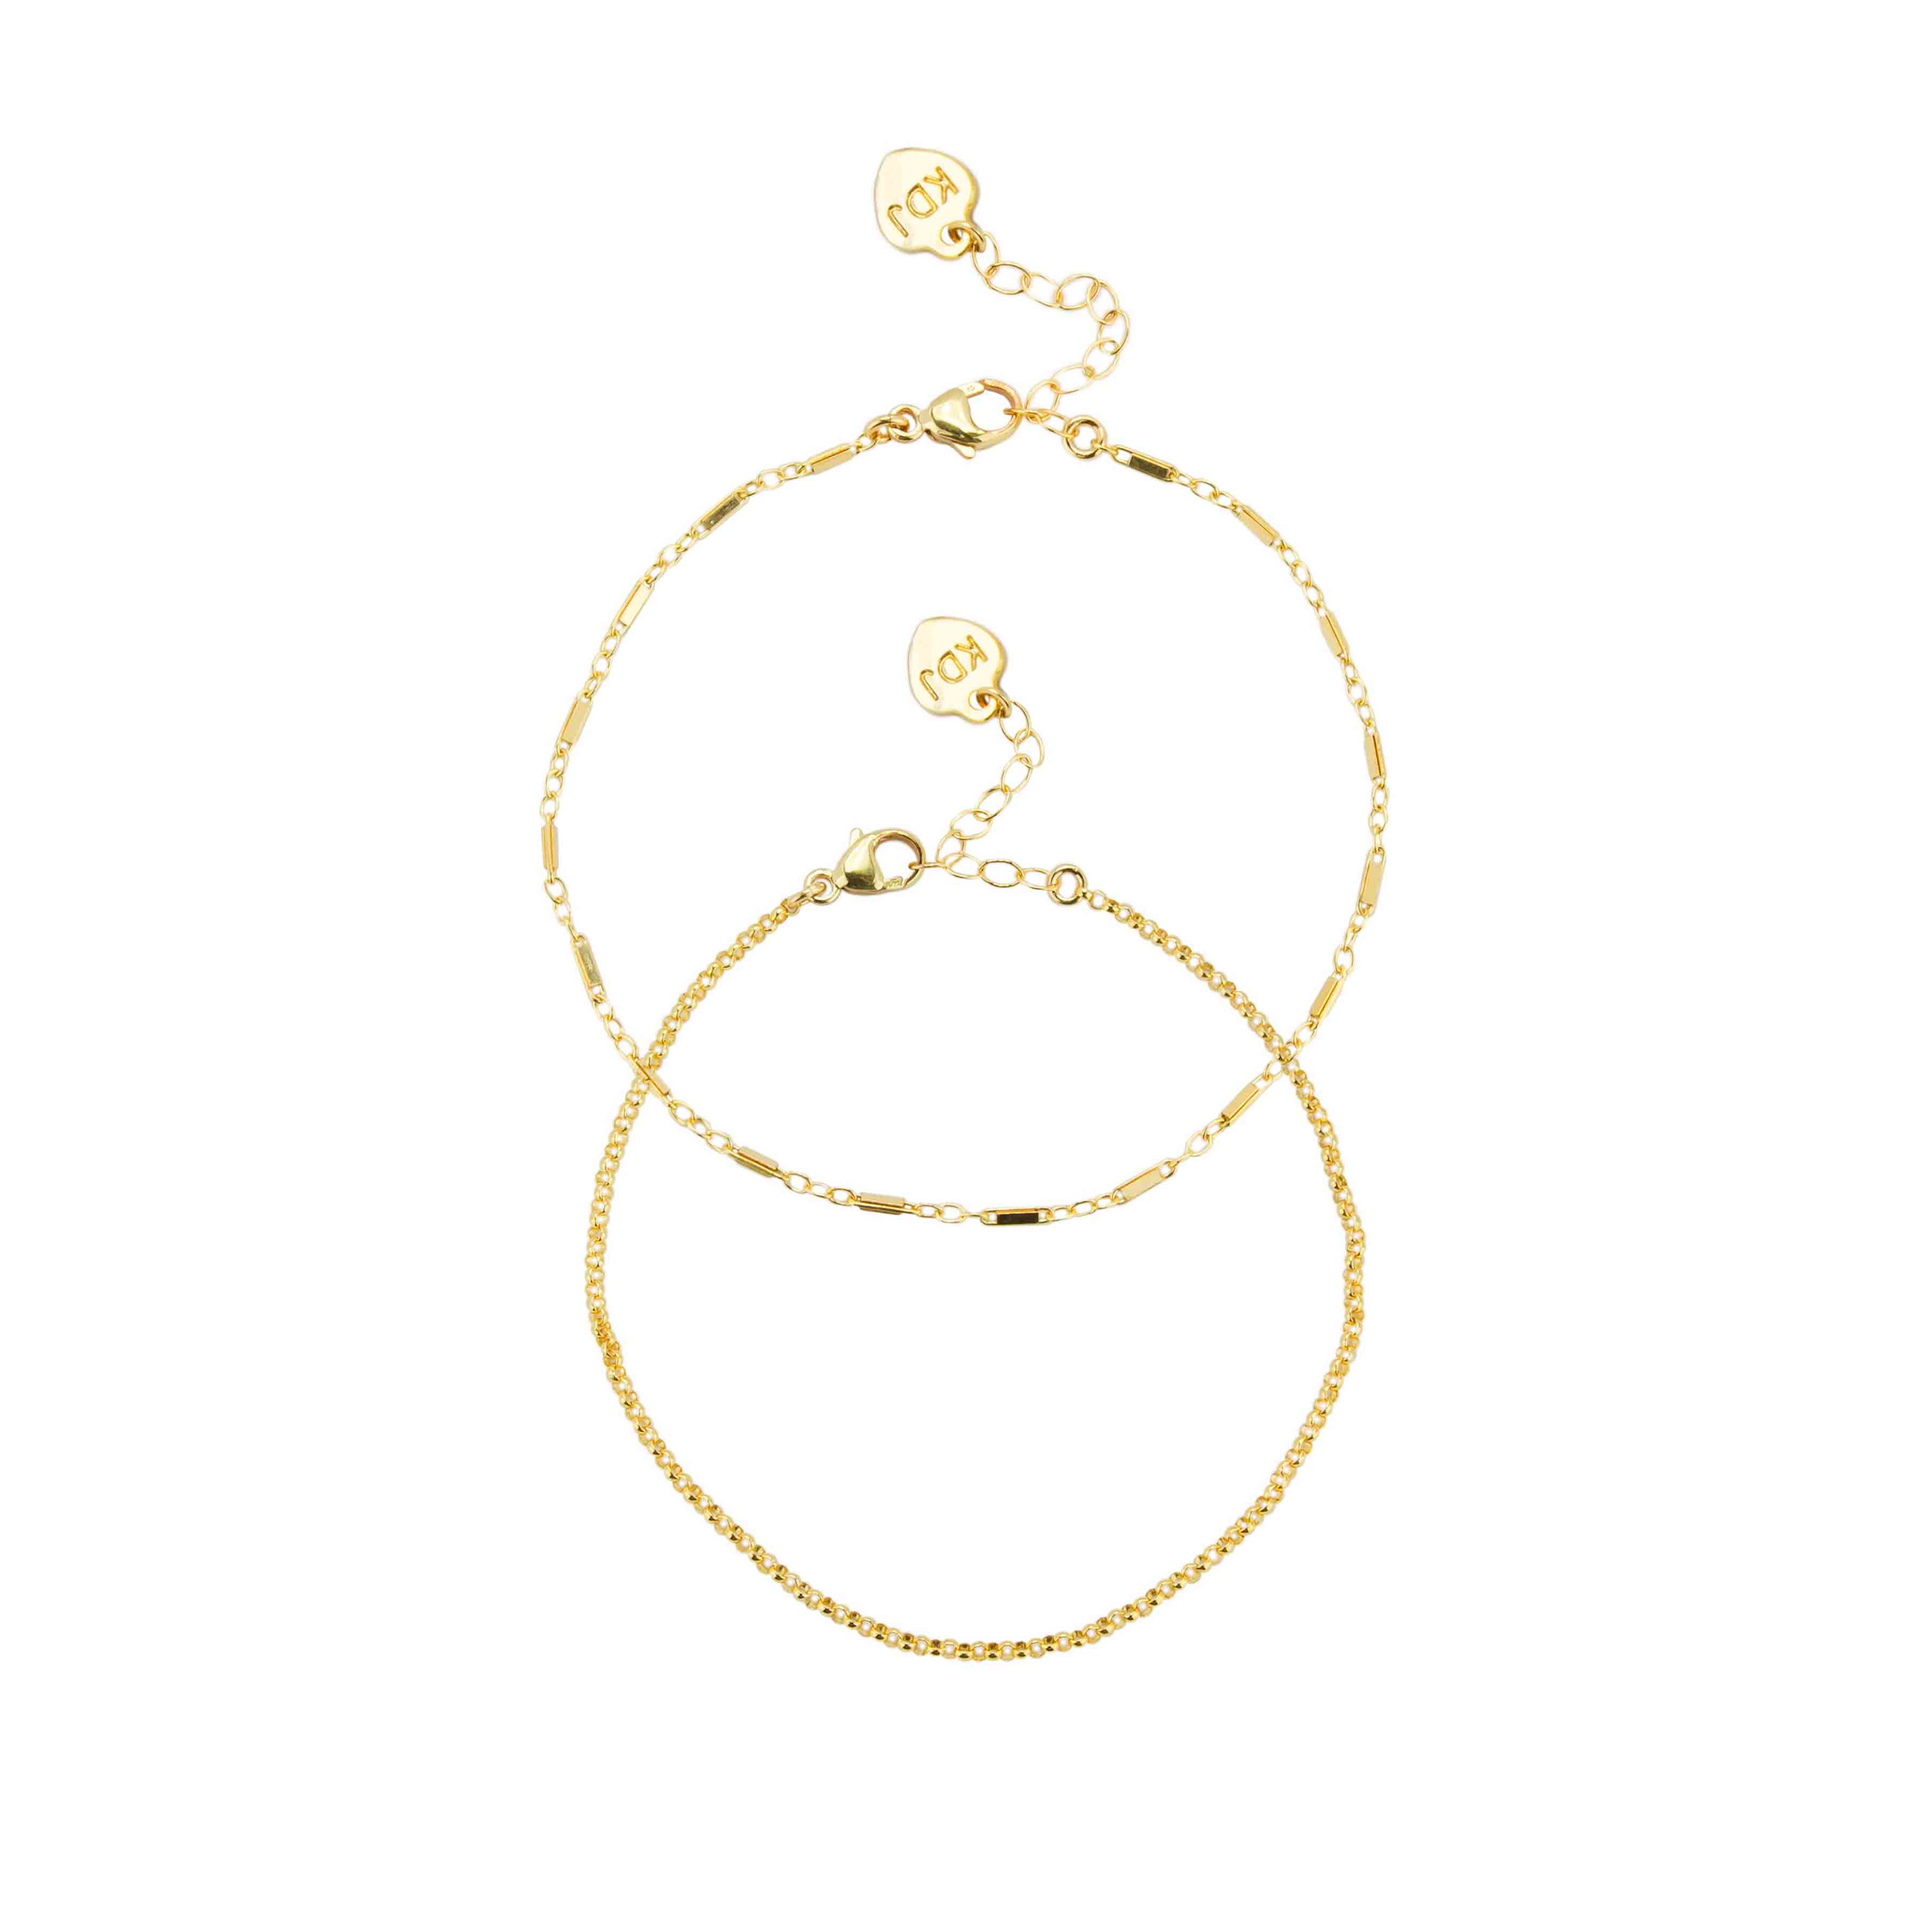 Two gold Chain Bracelets shown against a white background, handmade in California by Katie Dean Jewelry.